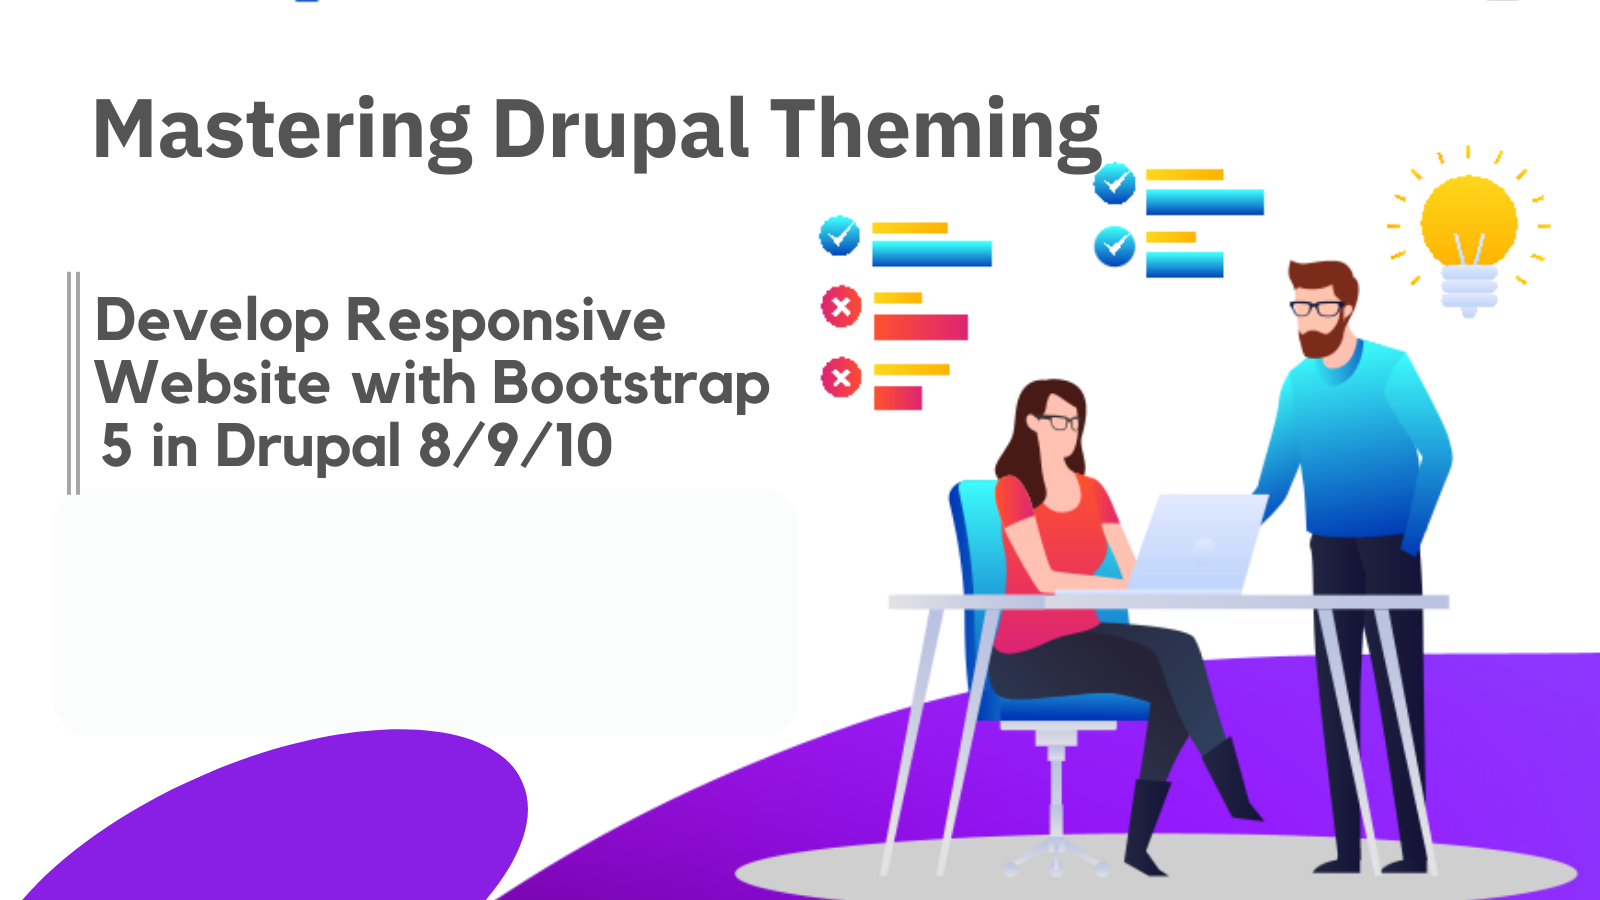 Mastering Drupal Theming: Develop Responsive Websites with Bootstrap 5 in Drupal 8/9/10